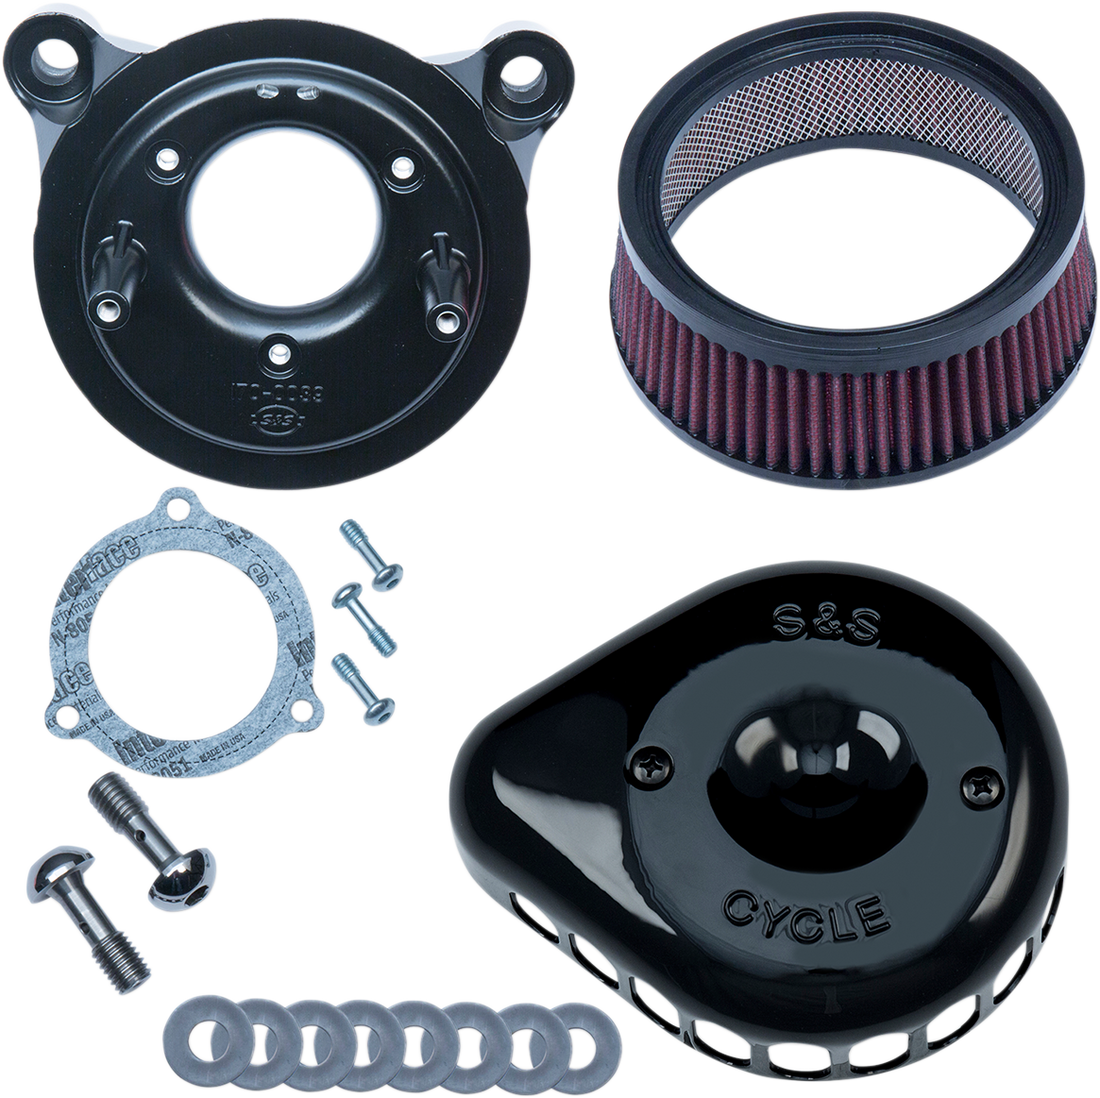 1010-2324 - S&S CYCLE Mounted Air Cleaner - Black - Throttle By Wire 170-0438